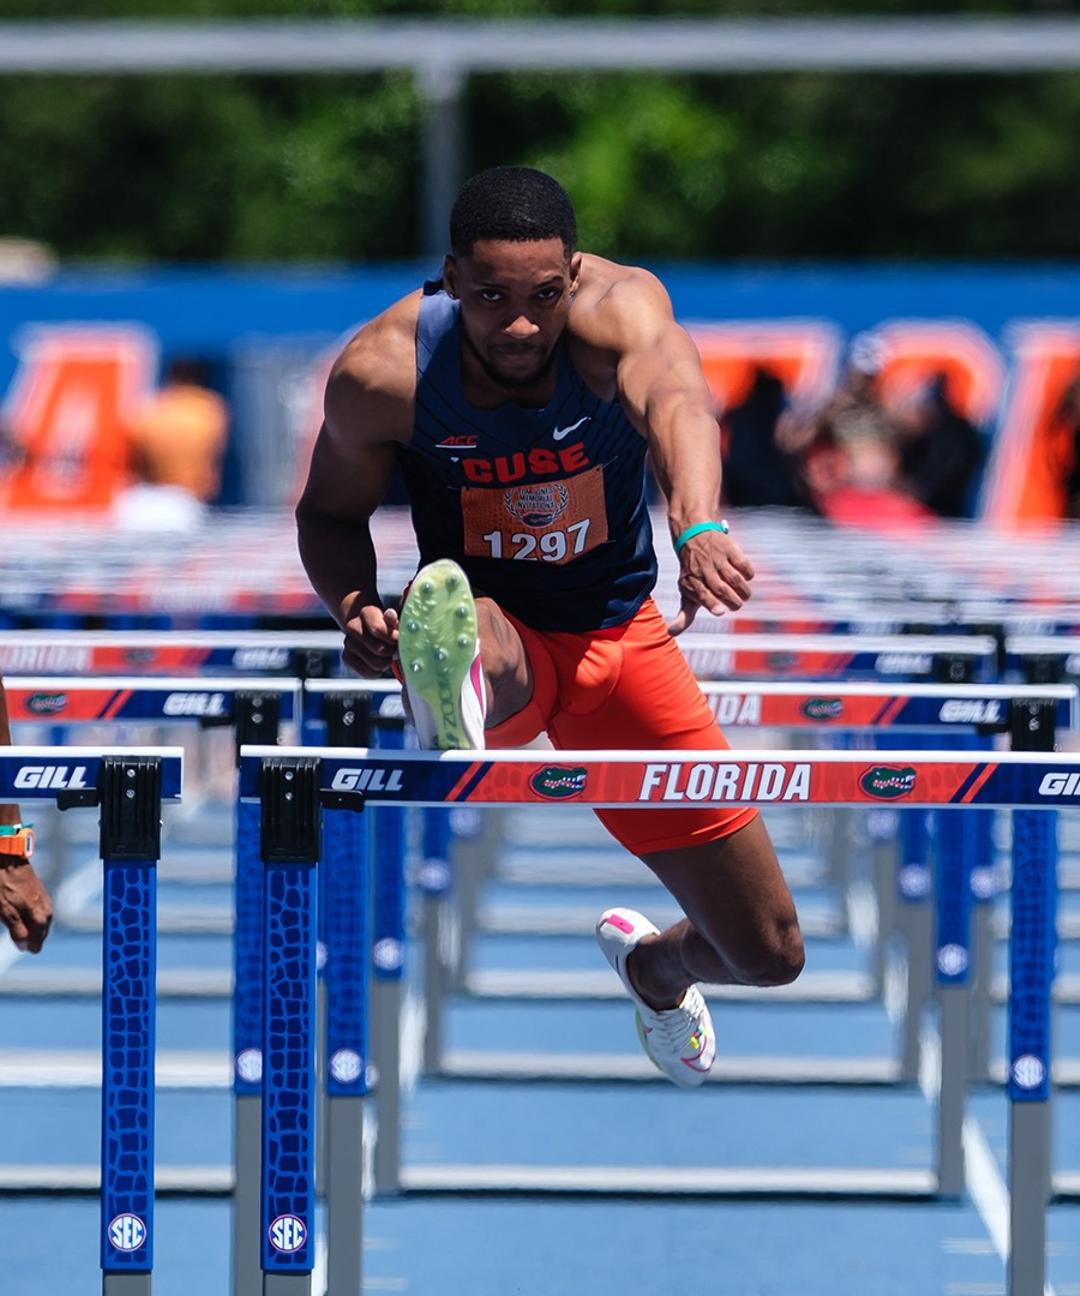 Image related to Hayles and Thorogood Advance at Penn Relays